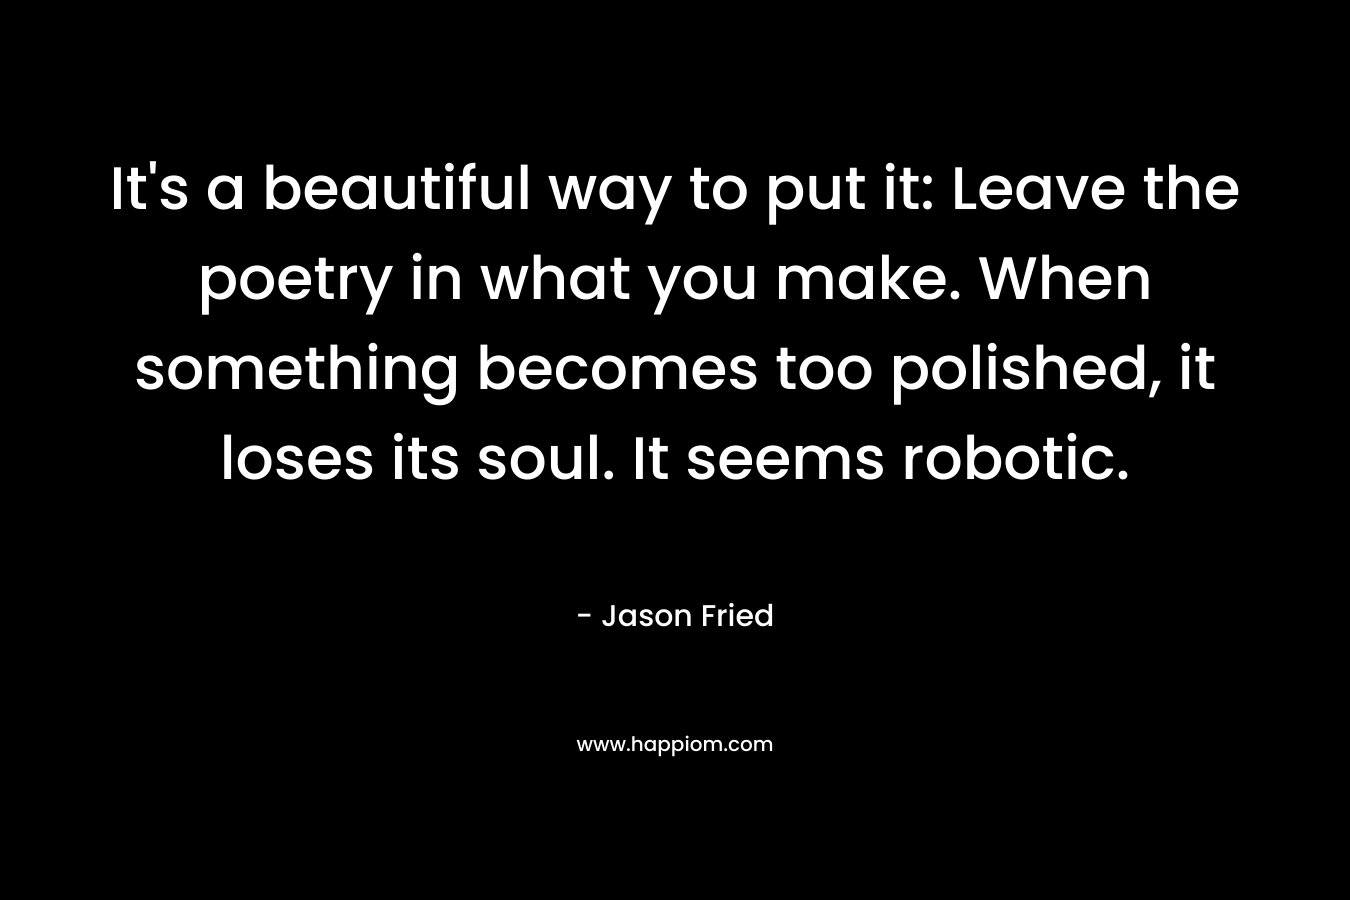 It’s a beautiful way to put it: Leave the poetry in what you make. When something becomes too polished, it loses its soul. It seems robotic. – Jason Fried